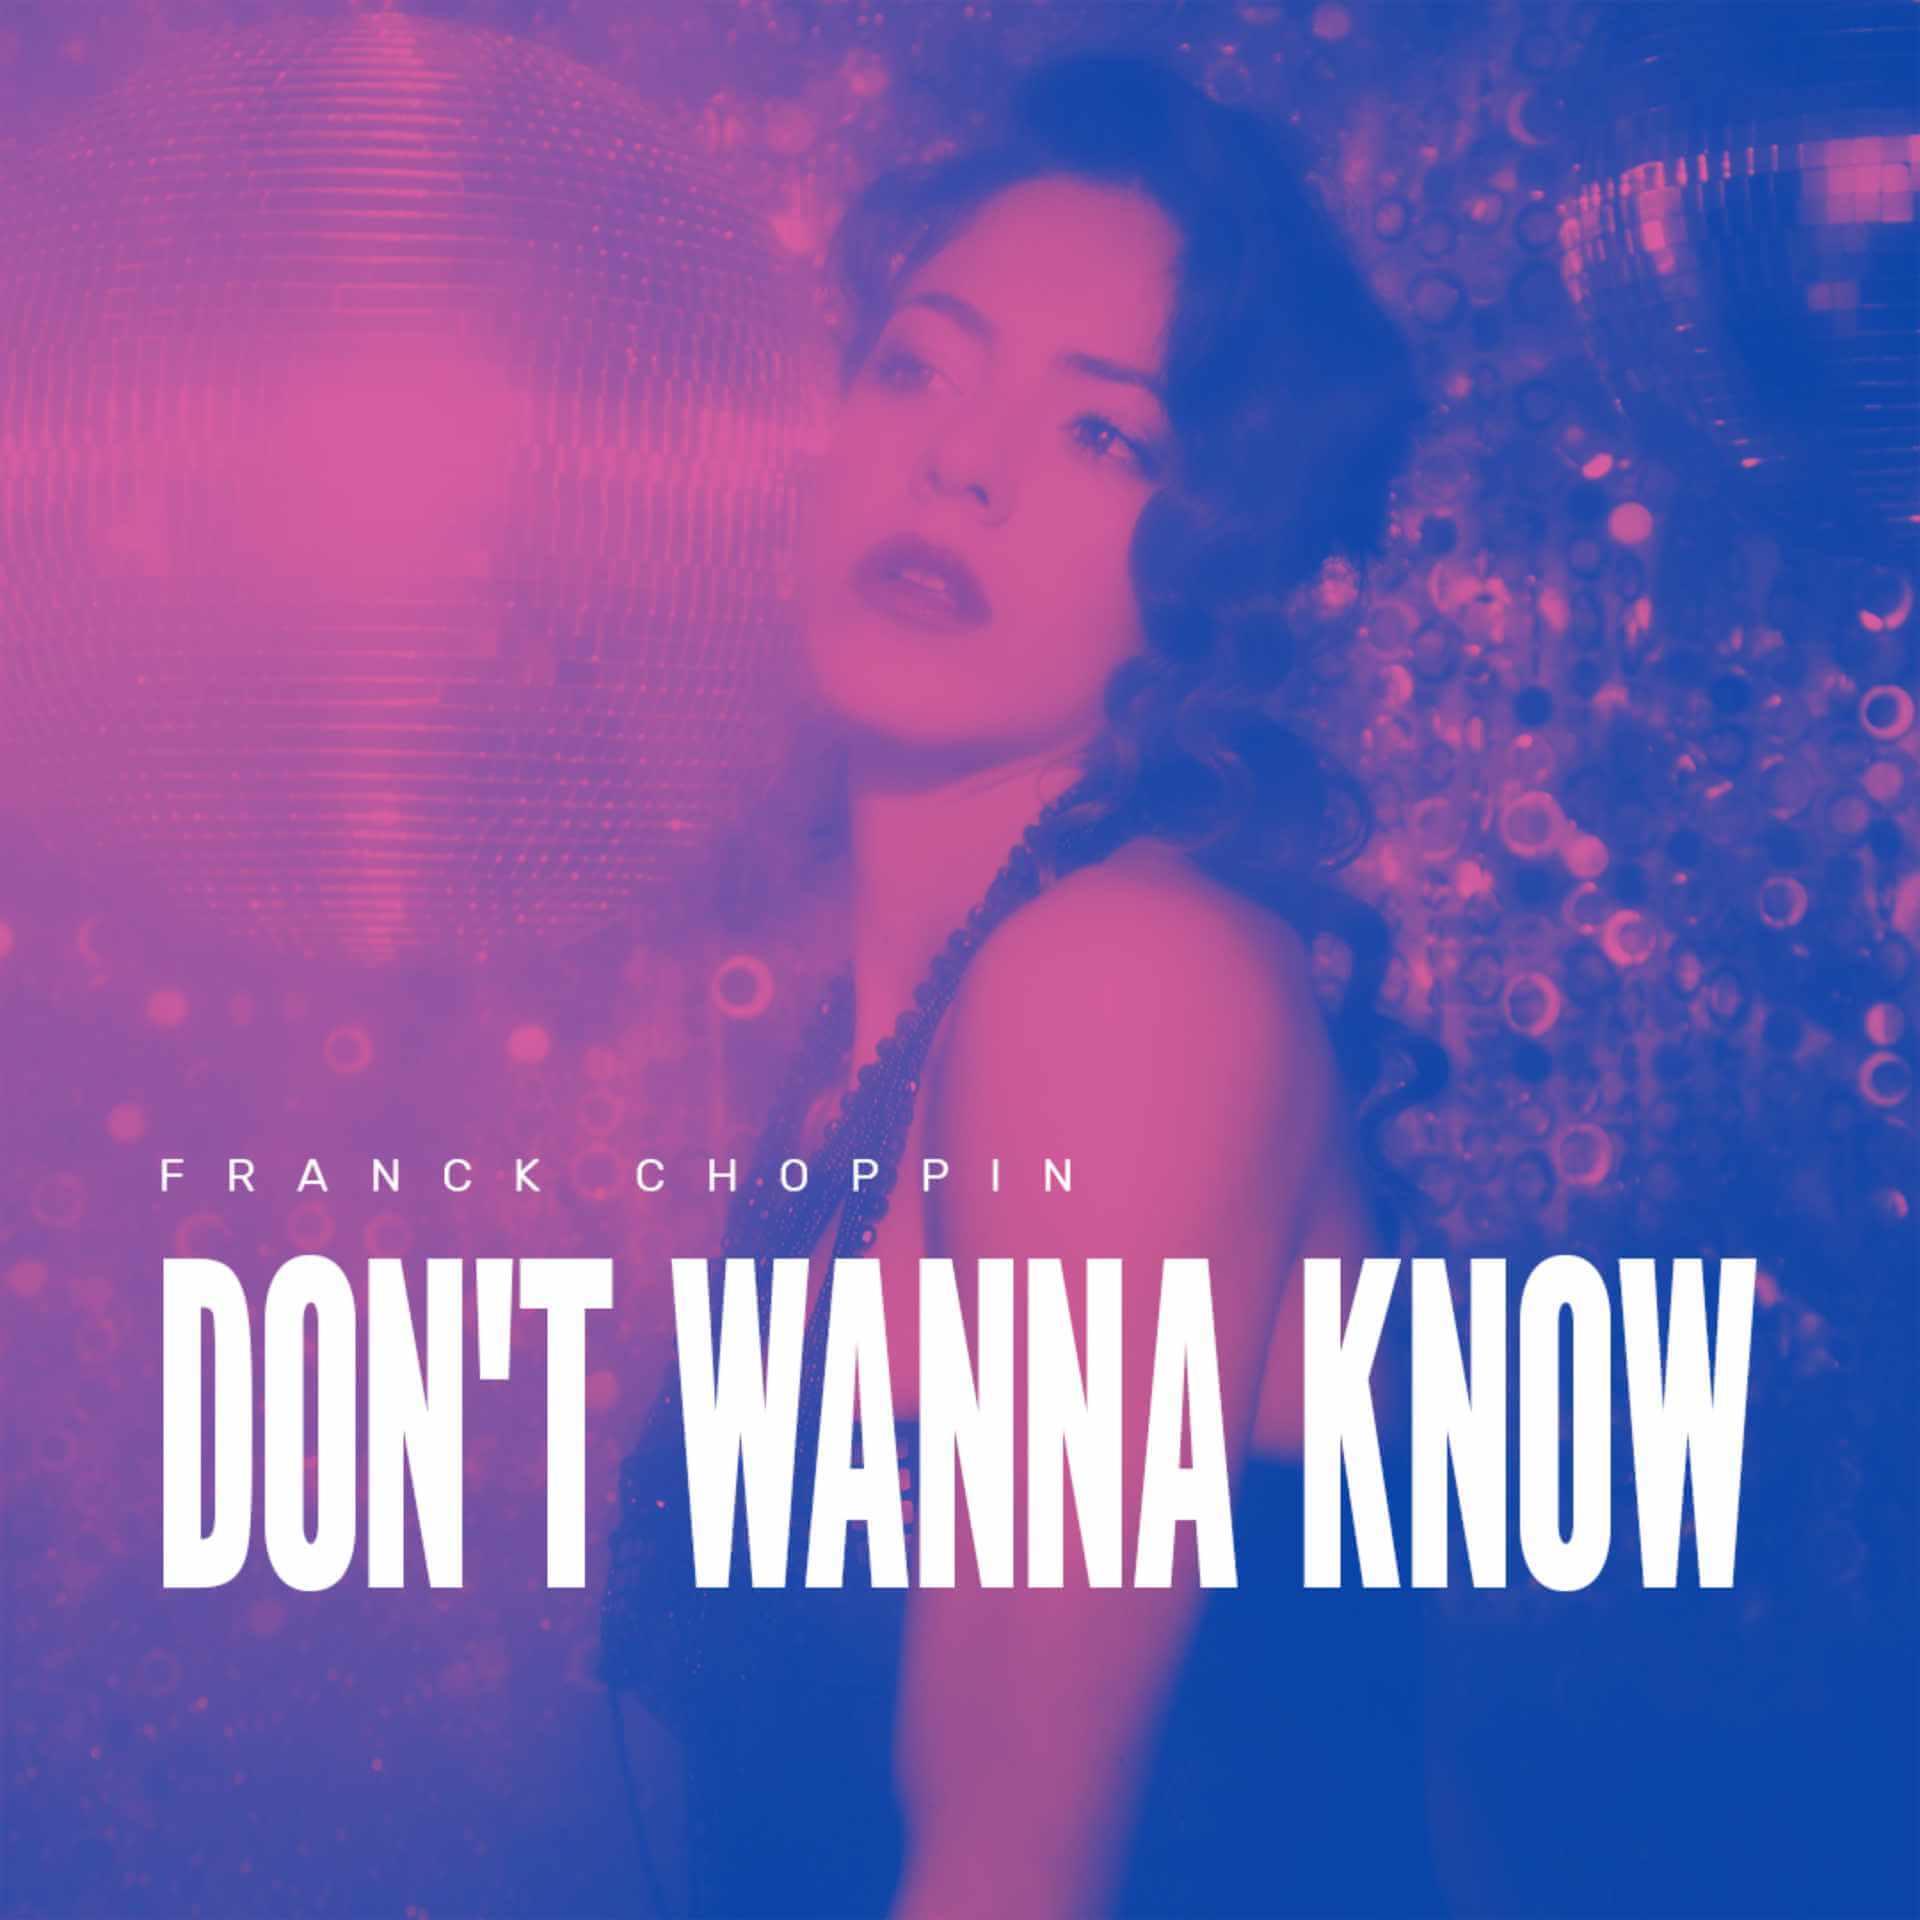 Franck Choppin - Don't Wanna Know (Discover) • Electrozombies